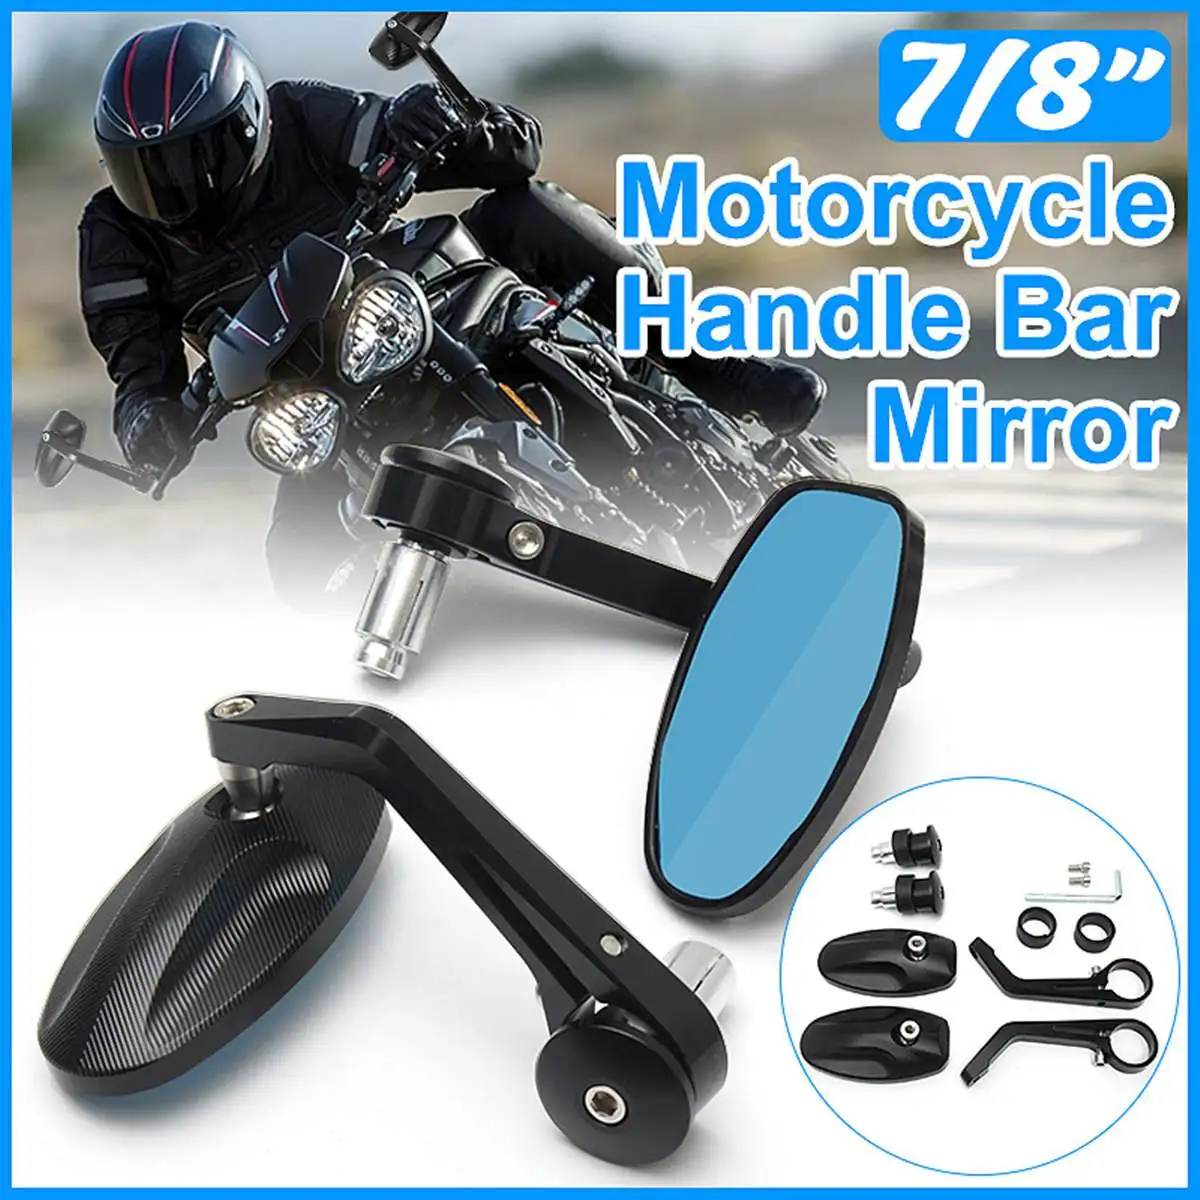 

2x Univesal CNC Motorcycle Bar End Rearview Side Mirrors For 7/8inch 22mm Handlebar Moped Dirt Bike Aluminium Rear View Mirrors